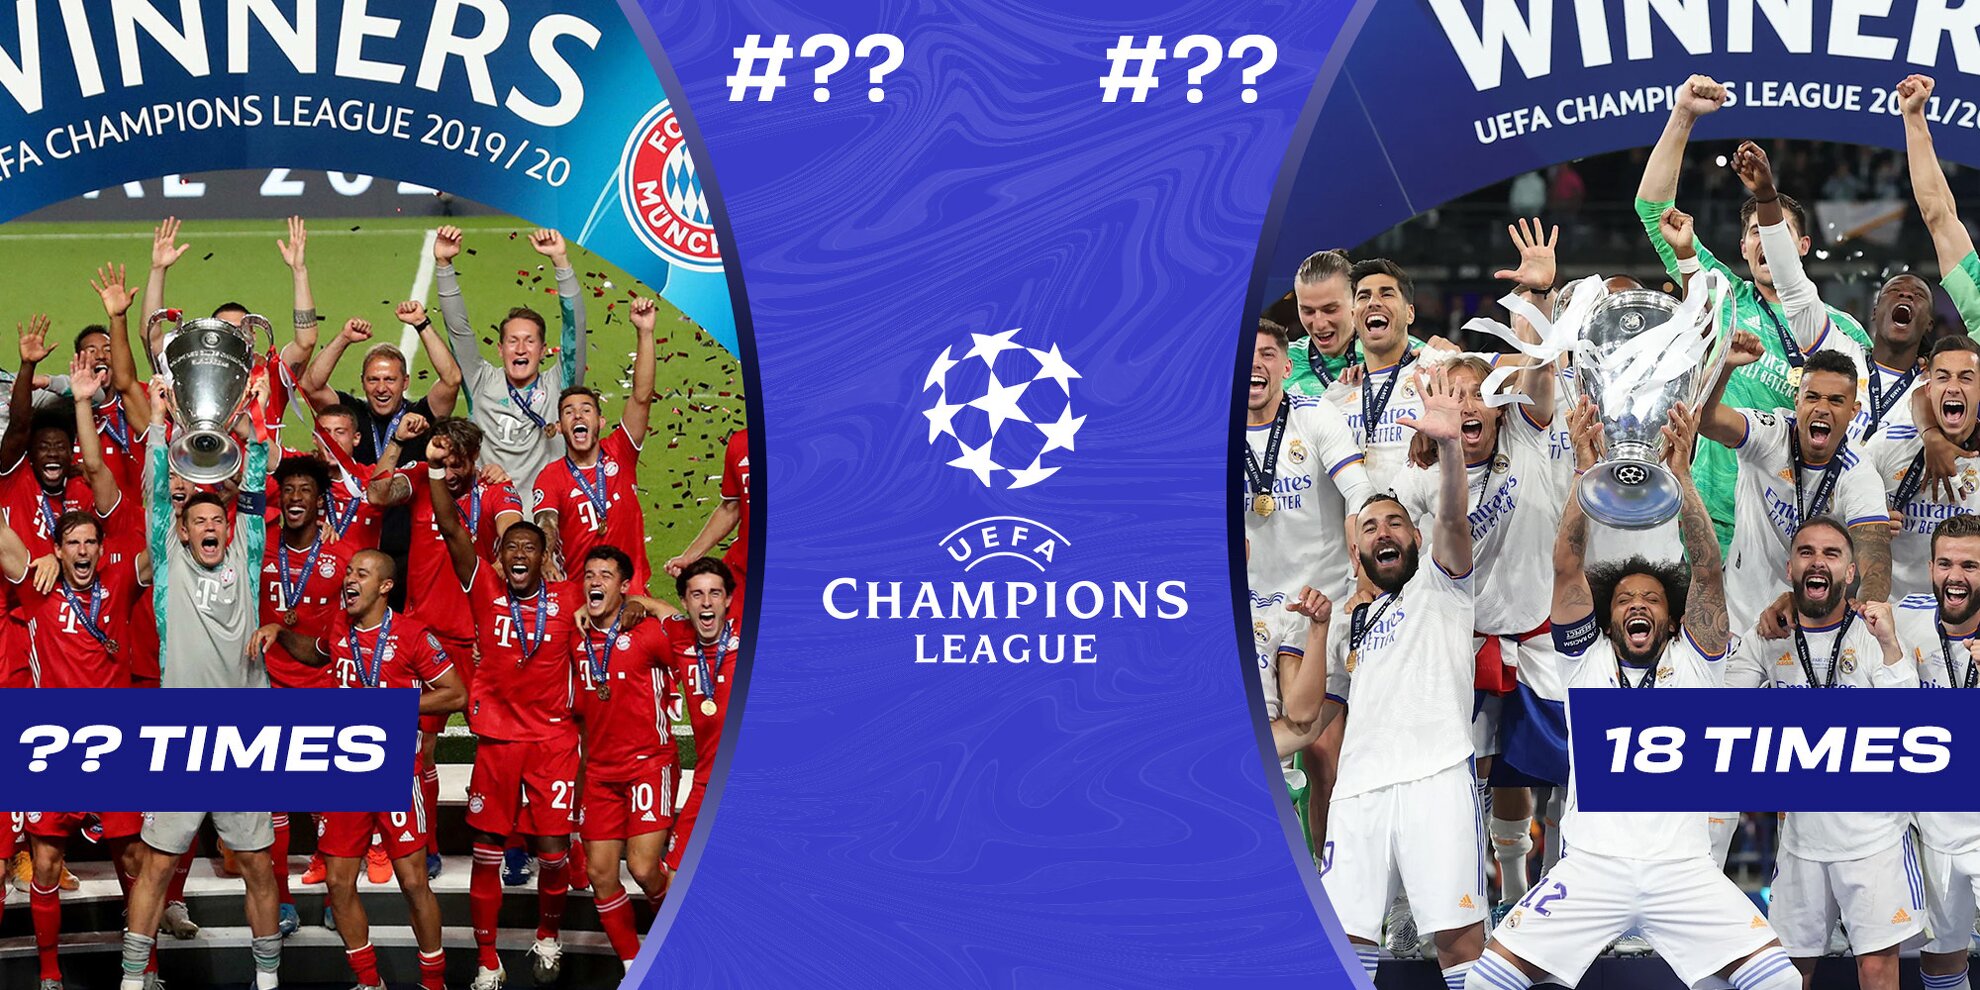 Top six clubs with the most Champions League quarter-finals appearances